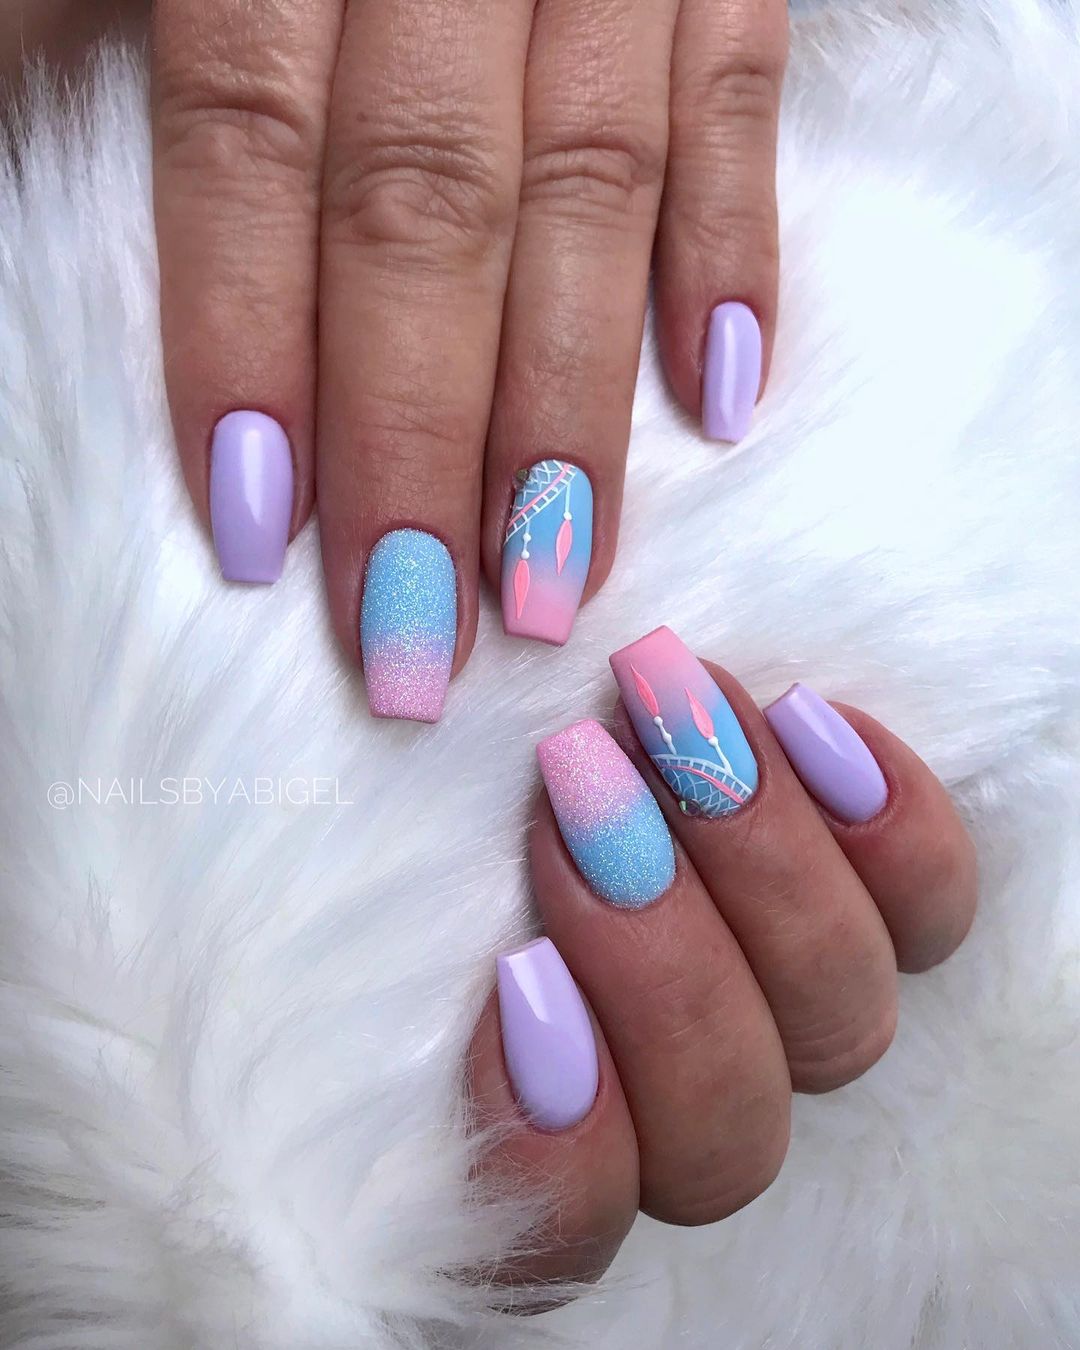 Short Purple Coffin Nails with Bright Pink Design